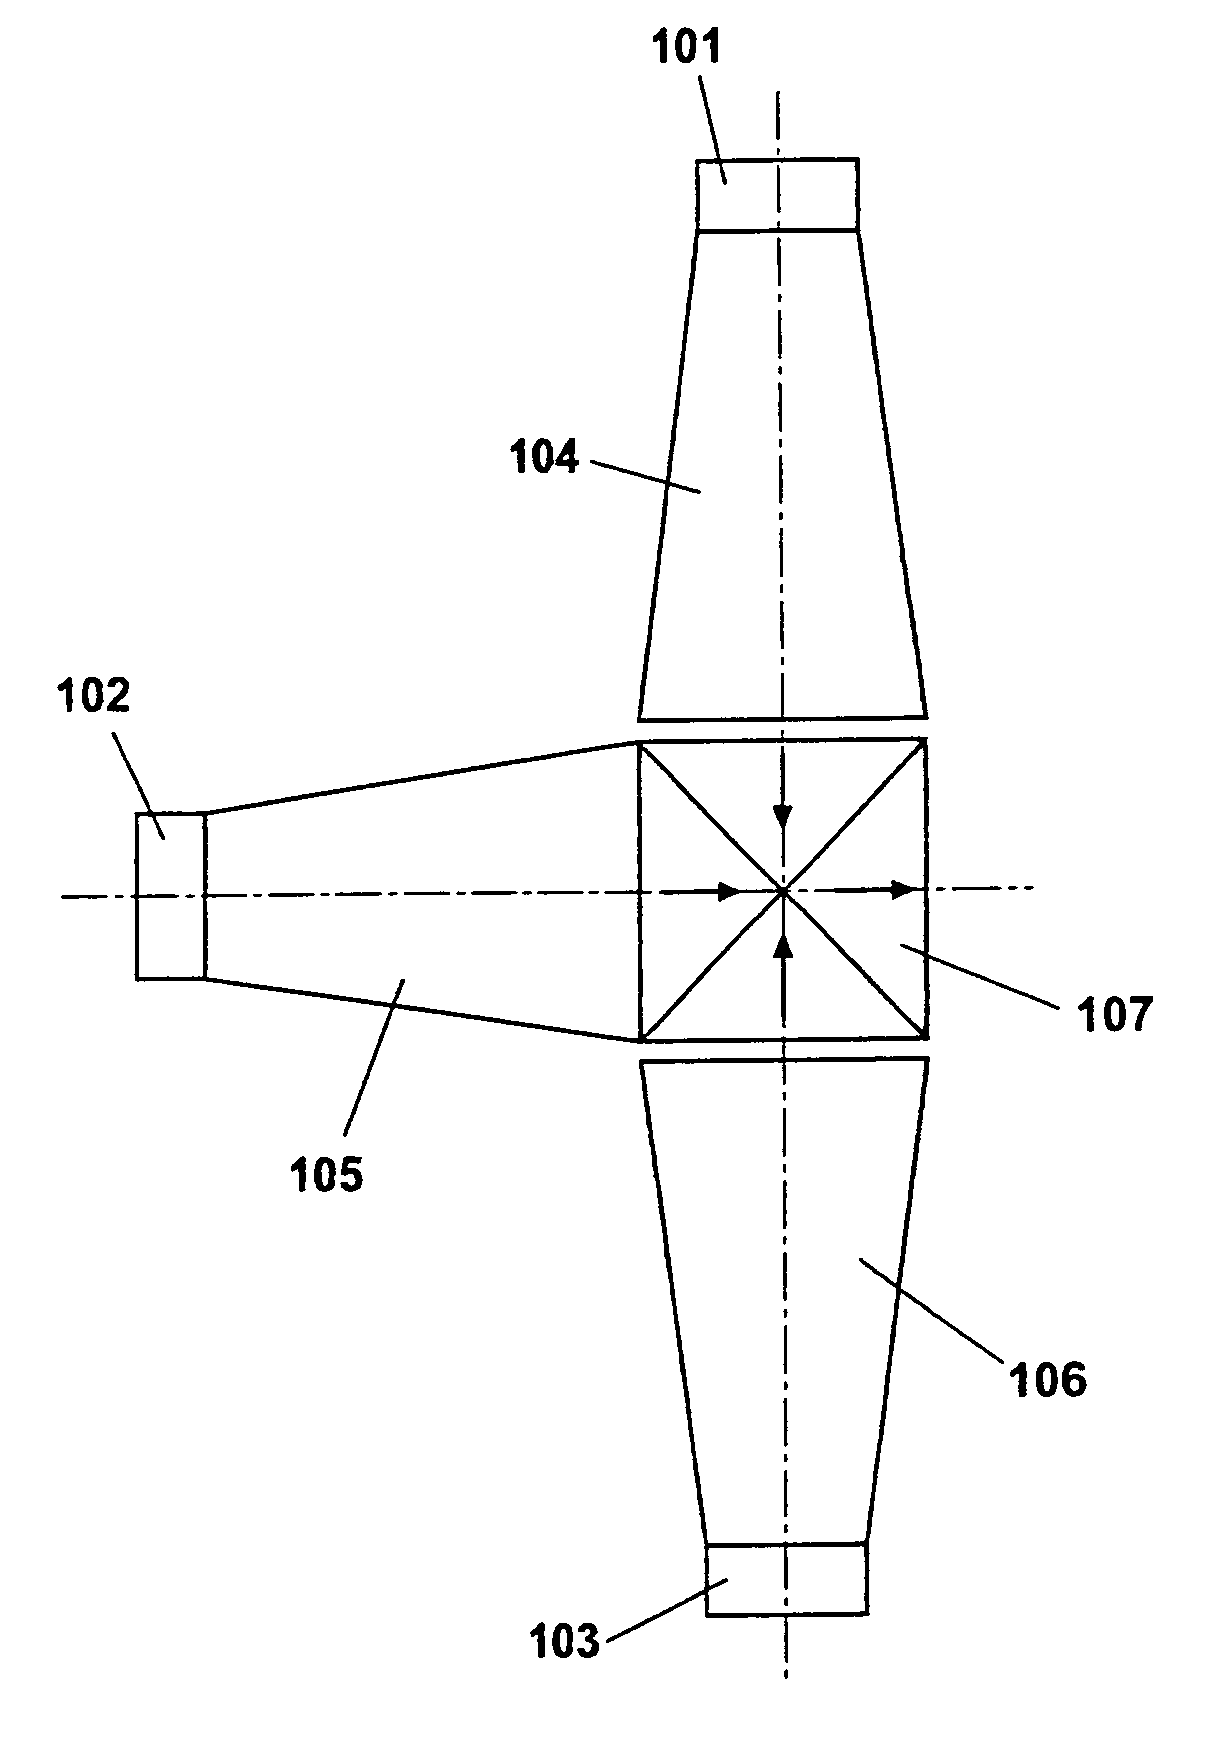 Light-emitting diode (LED) illumination system for a digital micro-mirror device (DMD) and method of providing same